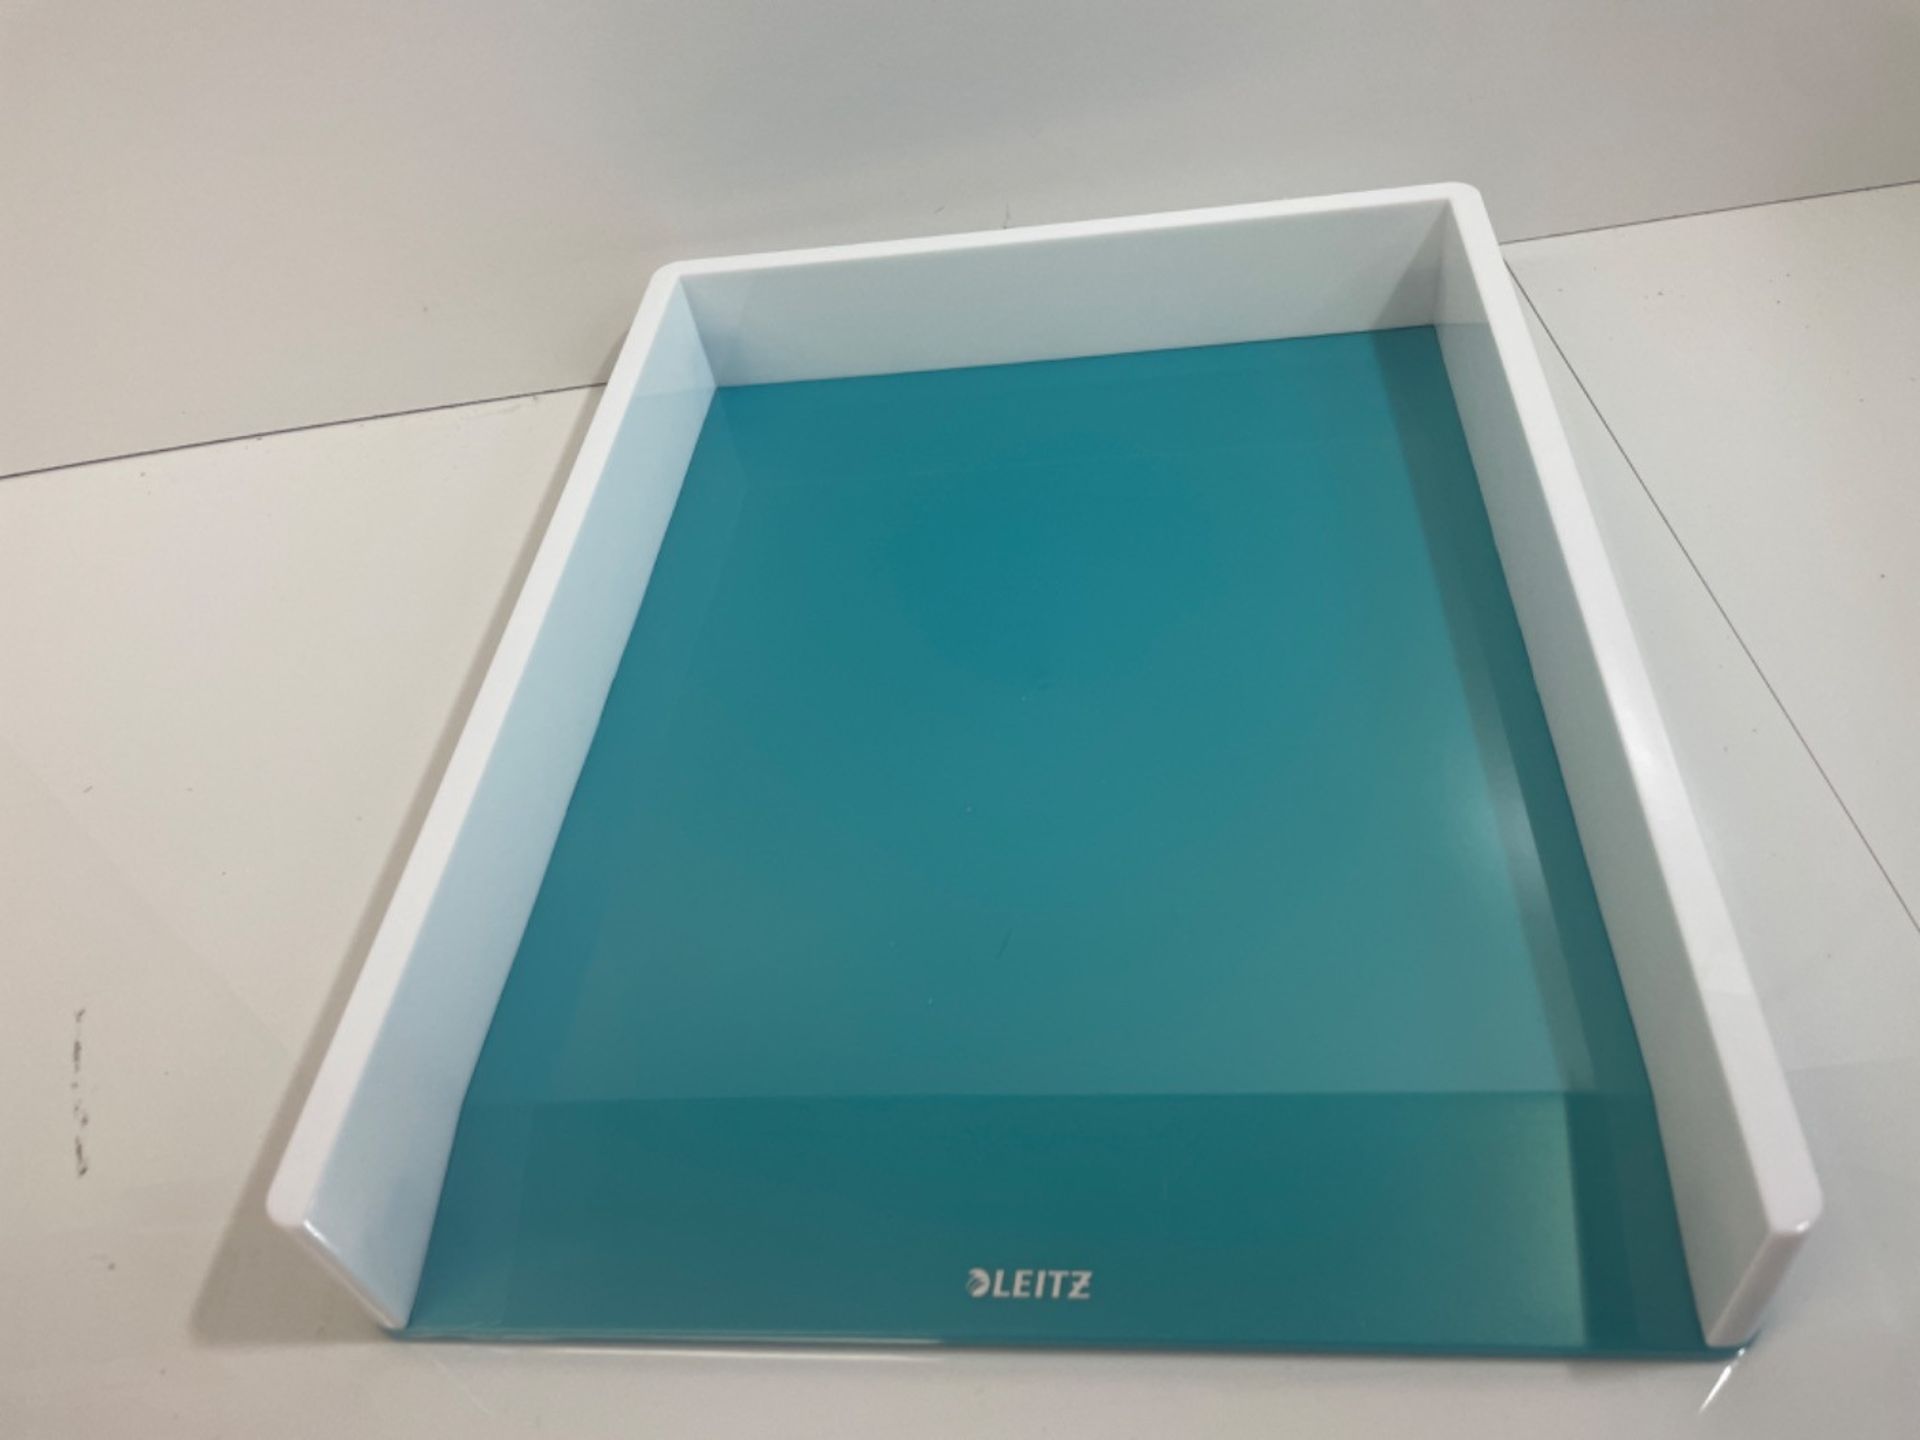 Leitz WOW Letter Tray Dual Colour, Ice Blue - Image 3 of 3